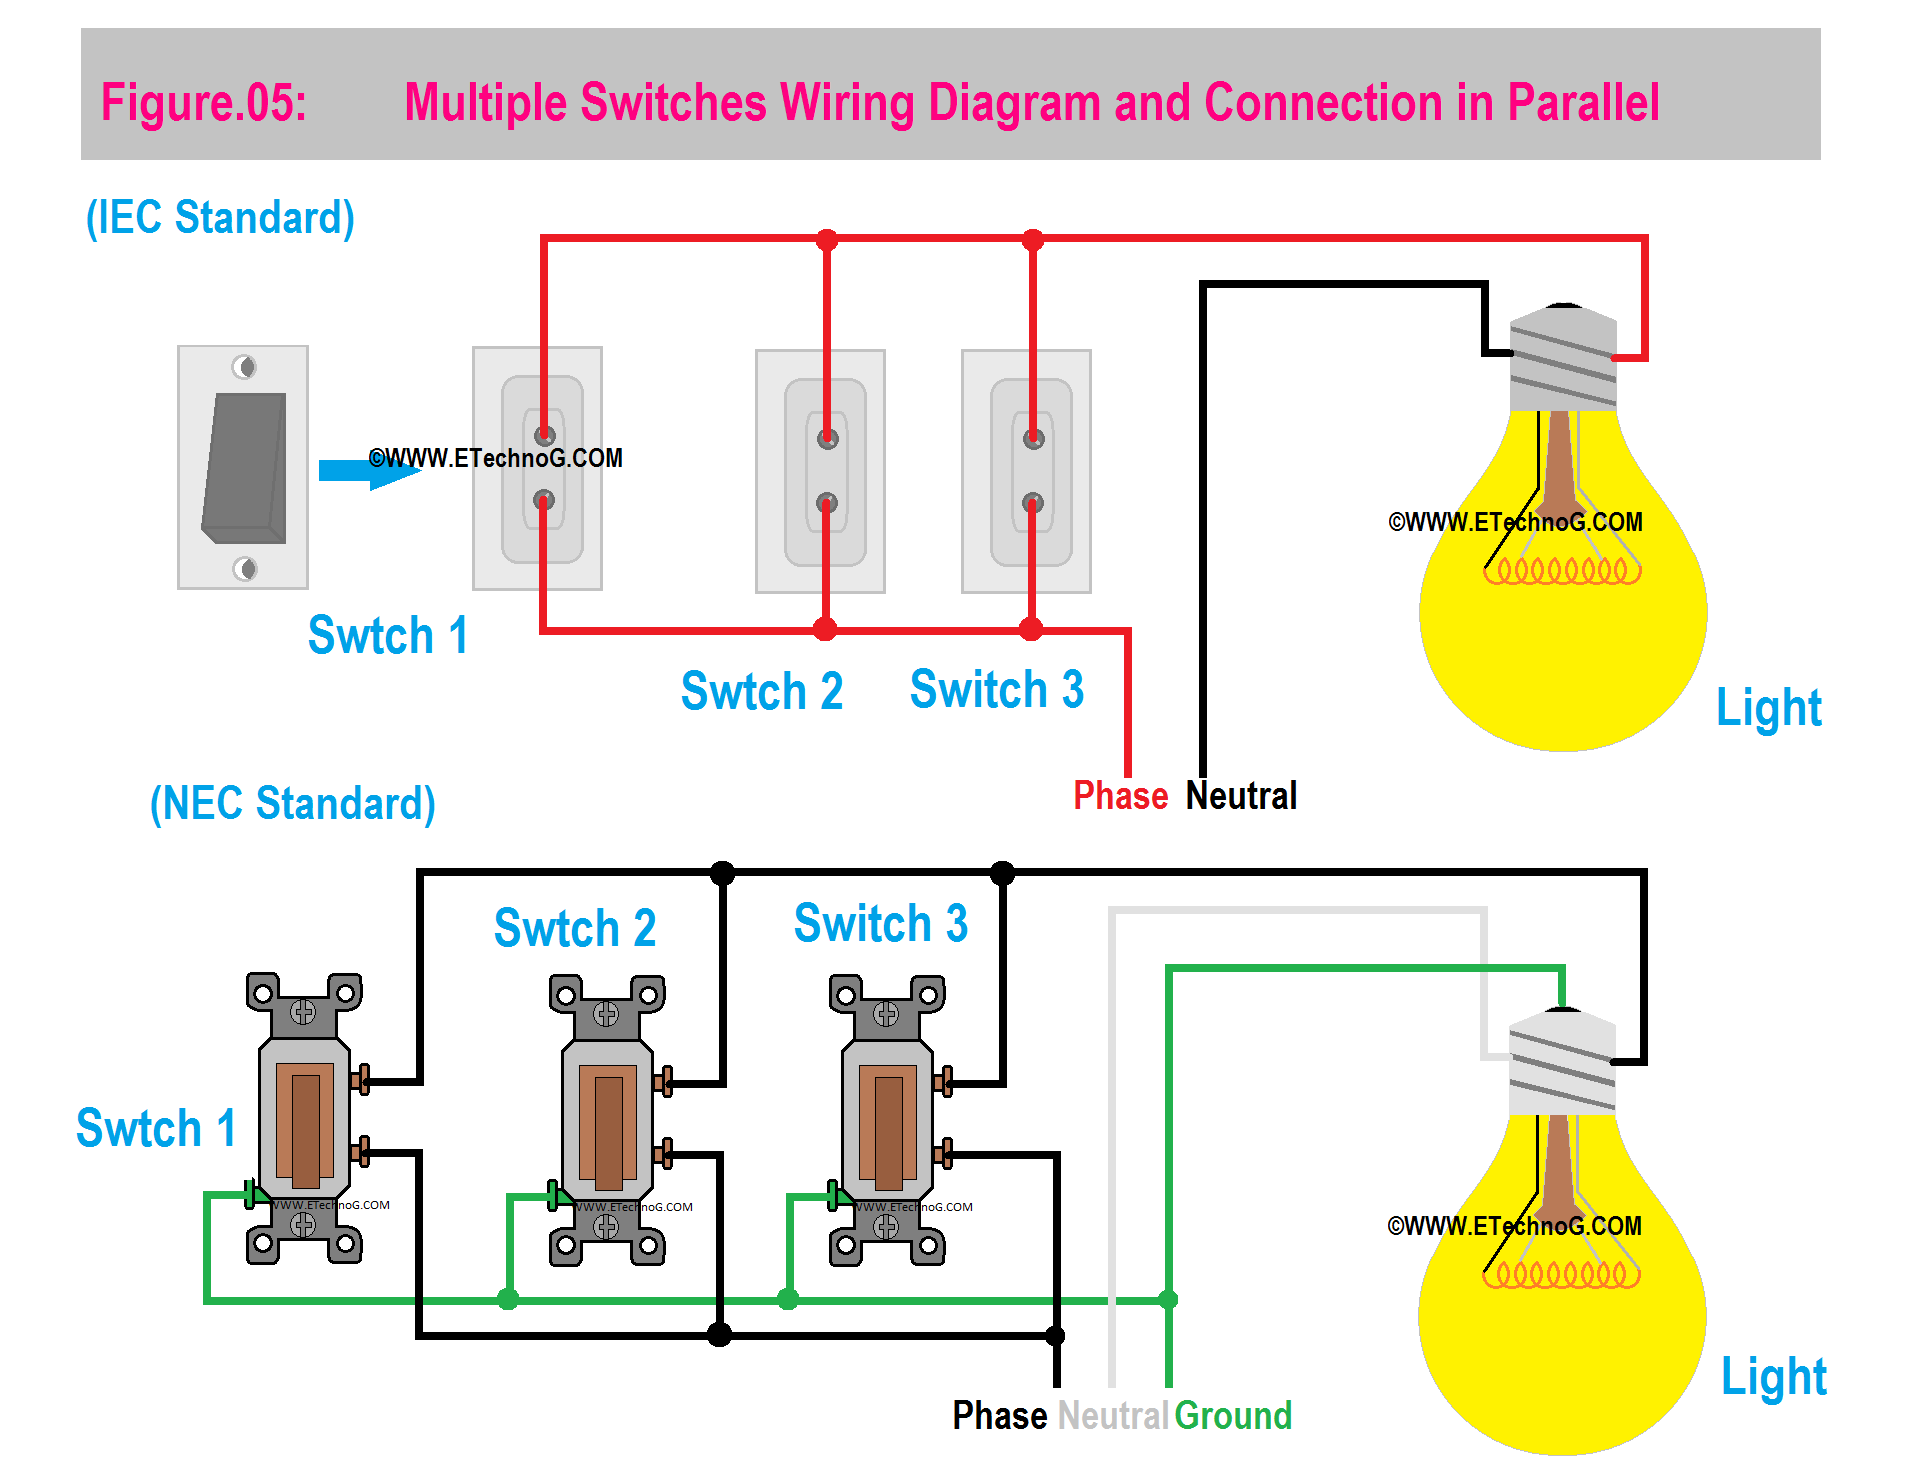 Multiple Switches Wiring Diagram and Connection in Parallel